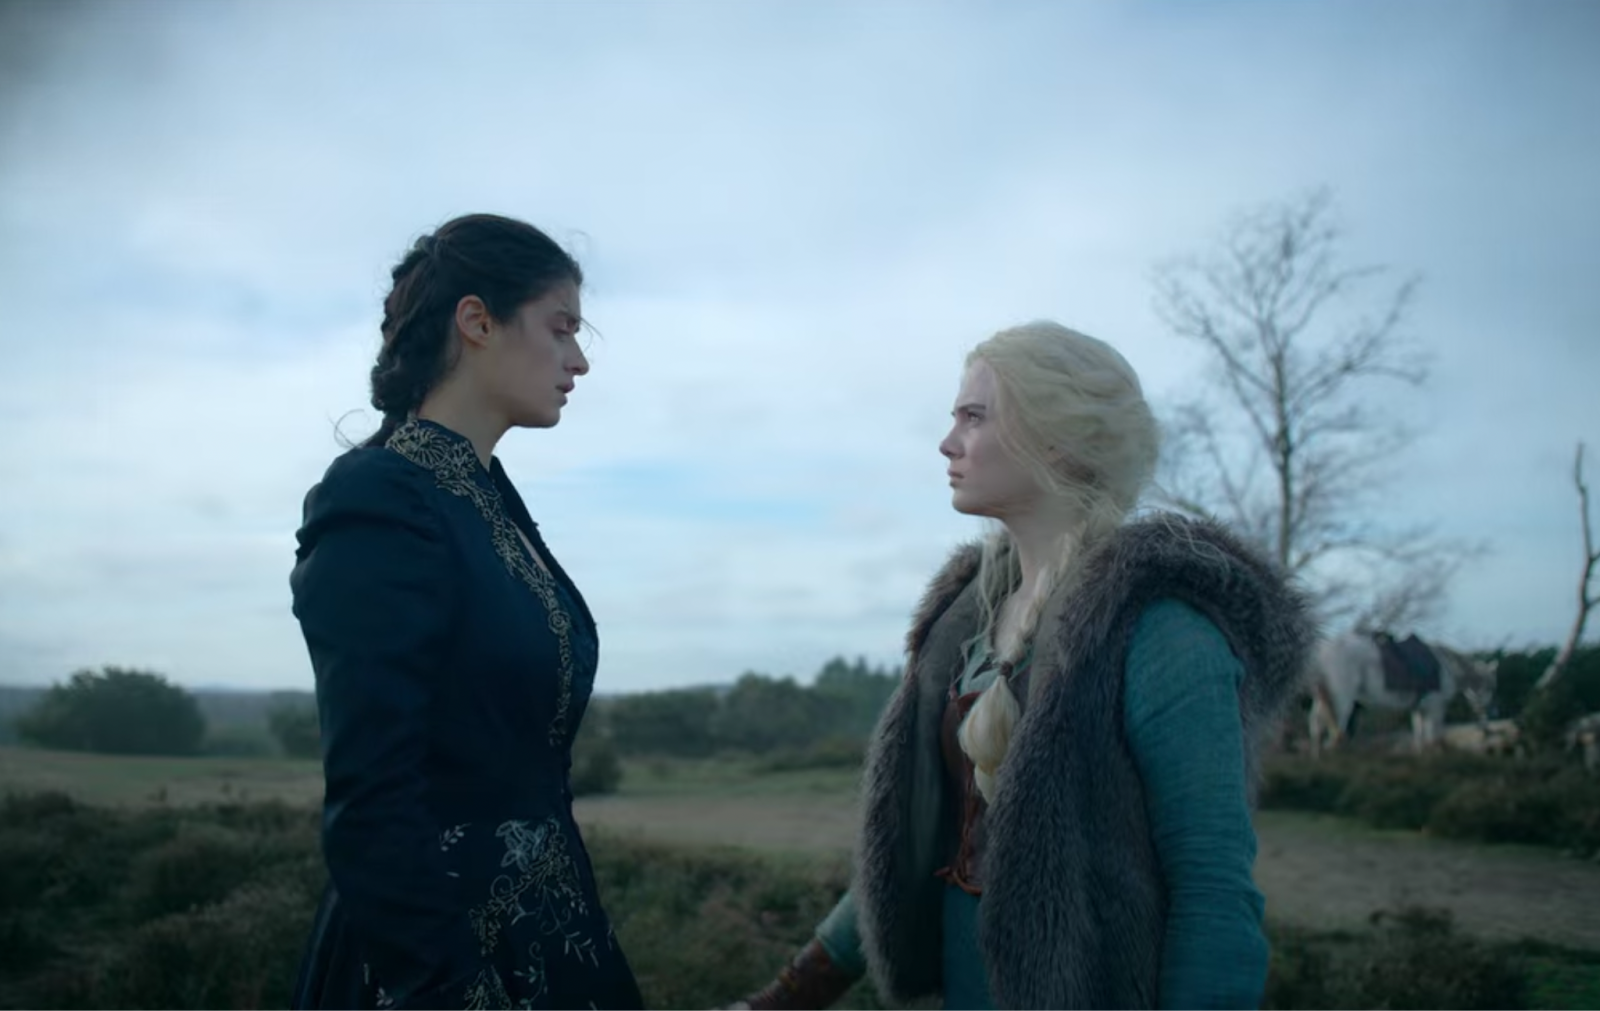 Yennefer and Ciri from The Witcher Netflix show